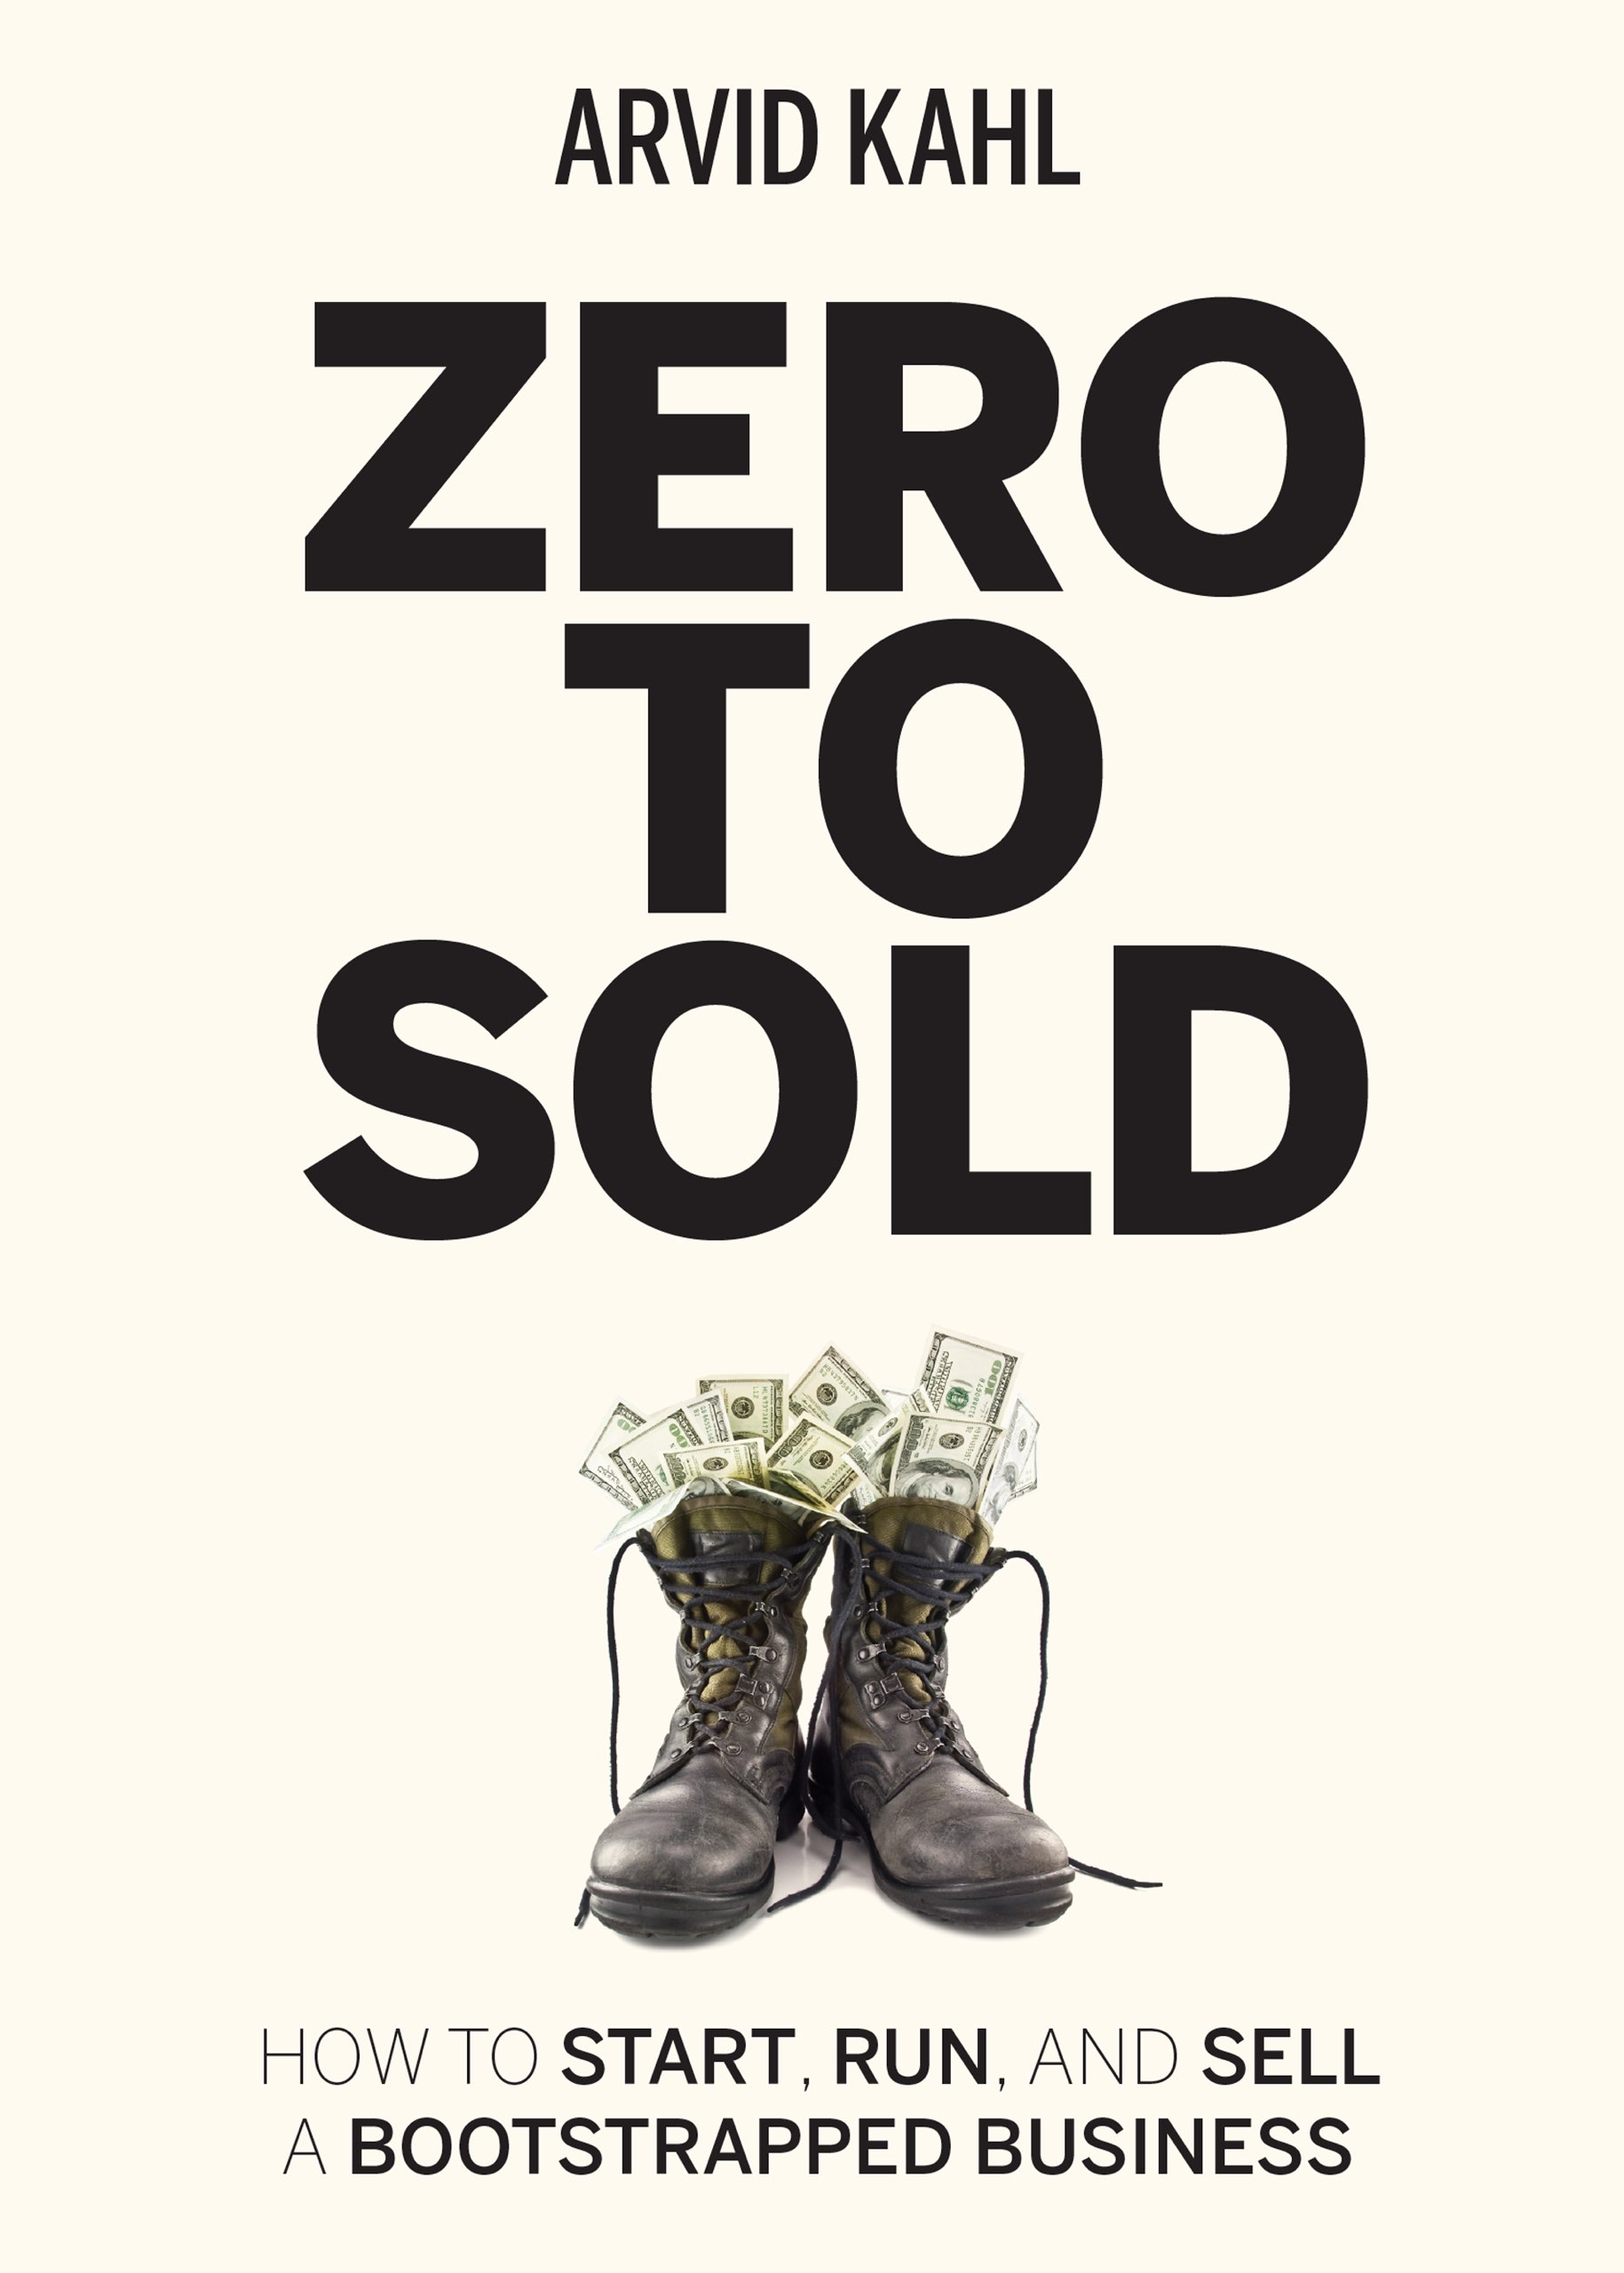 Zero to Sold by Arvid Kahl